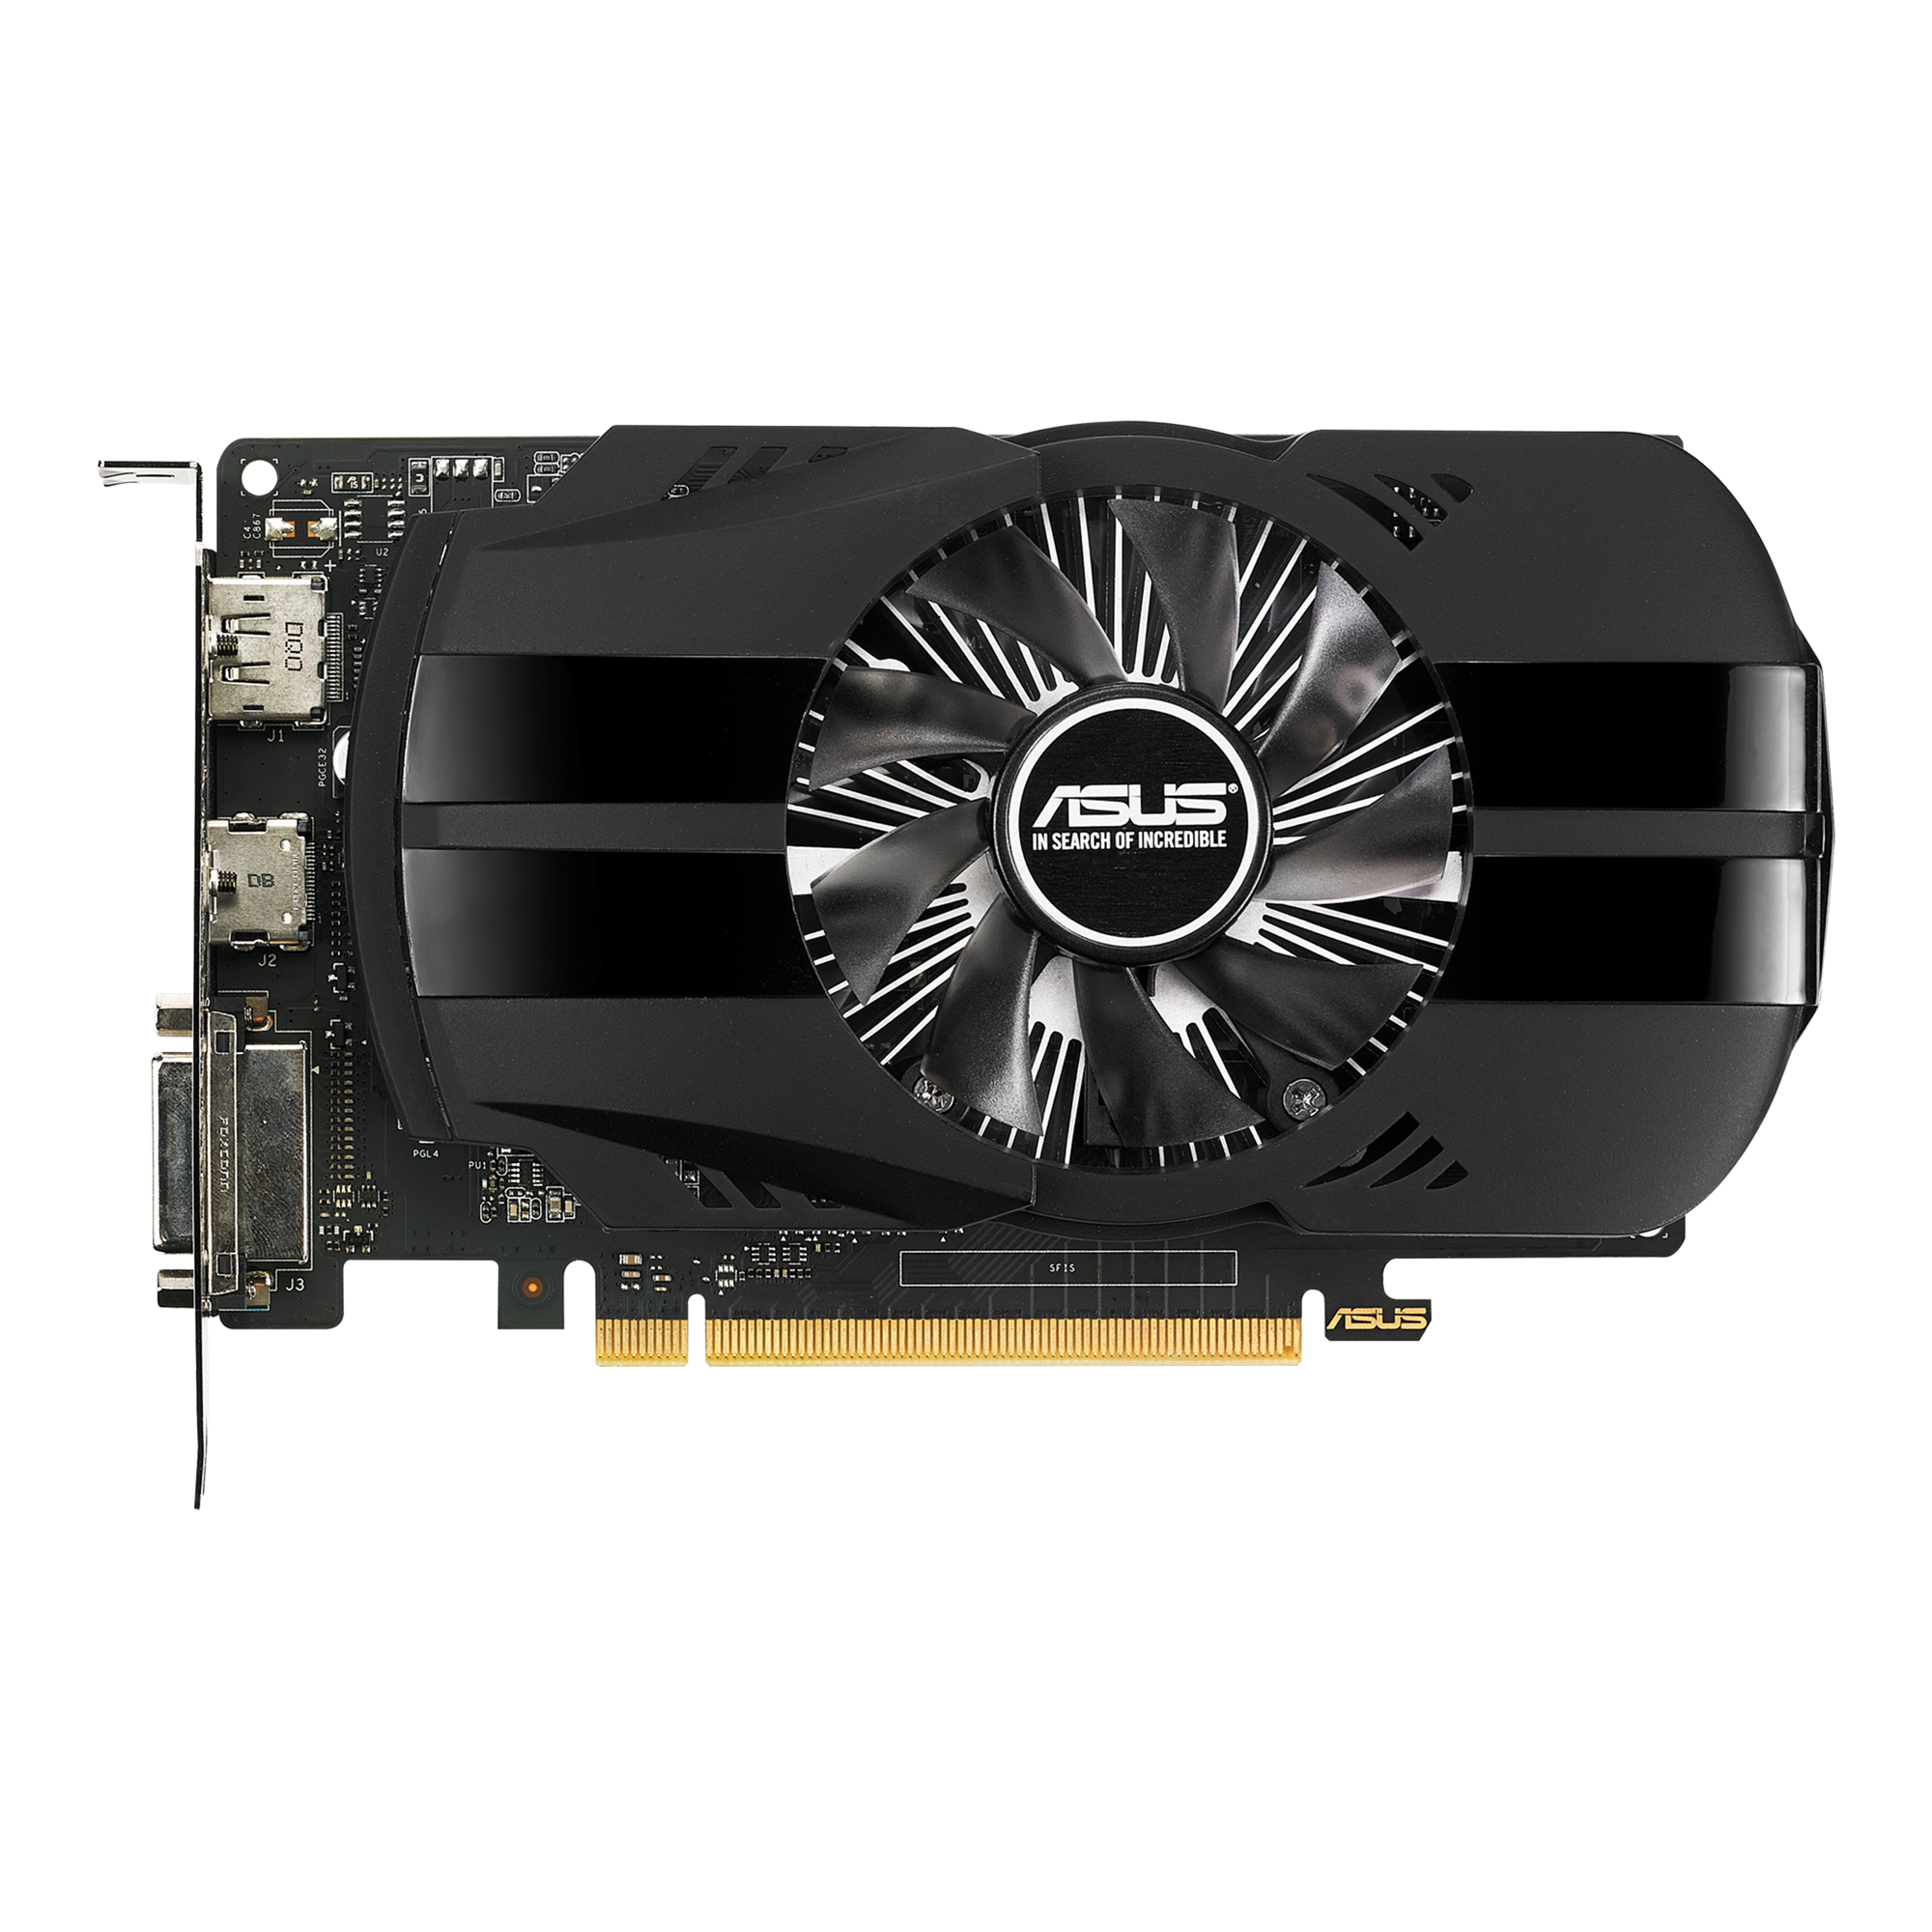 ASUS GEFORCE GTX 1050Ti 4GBPC/タブレット